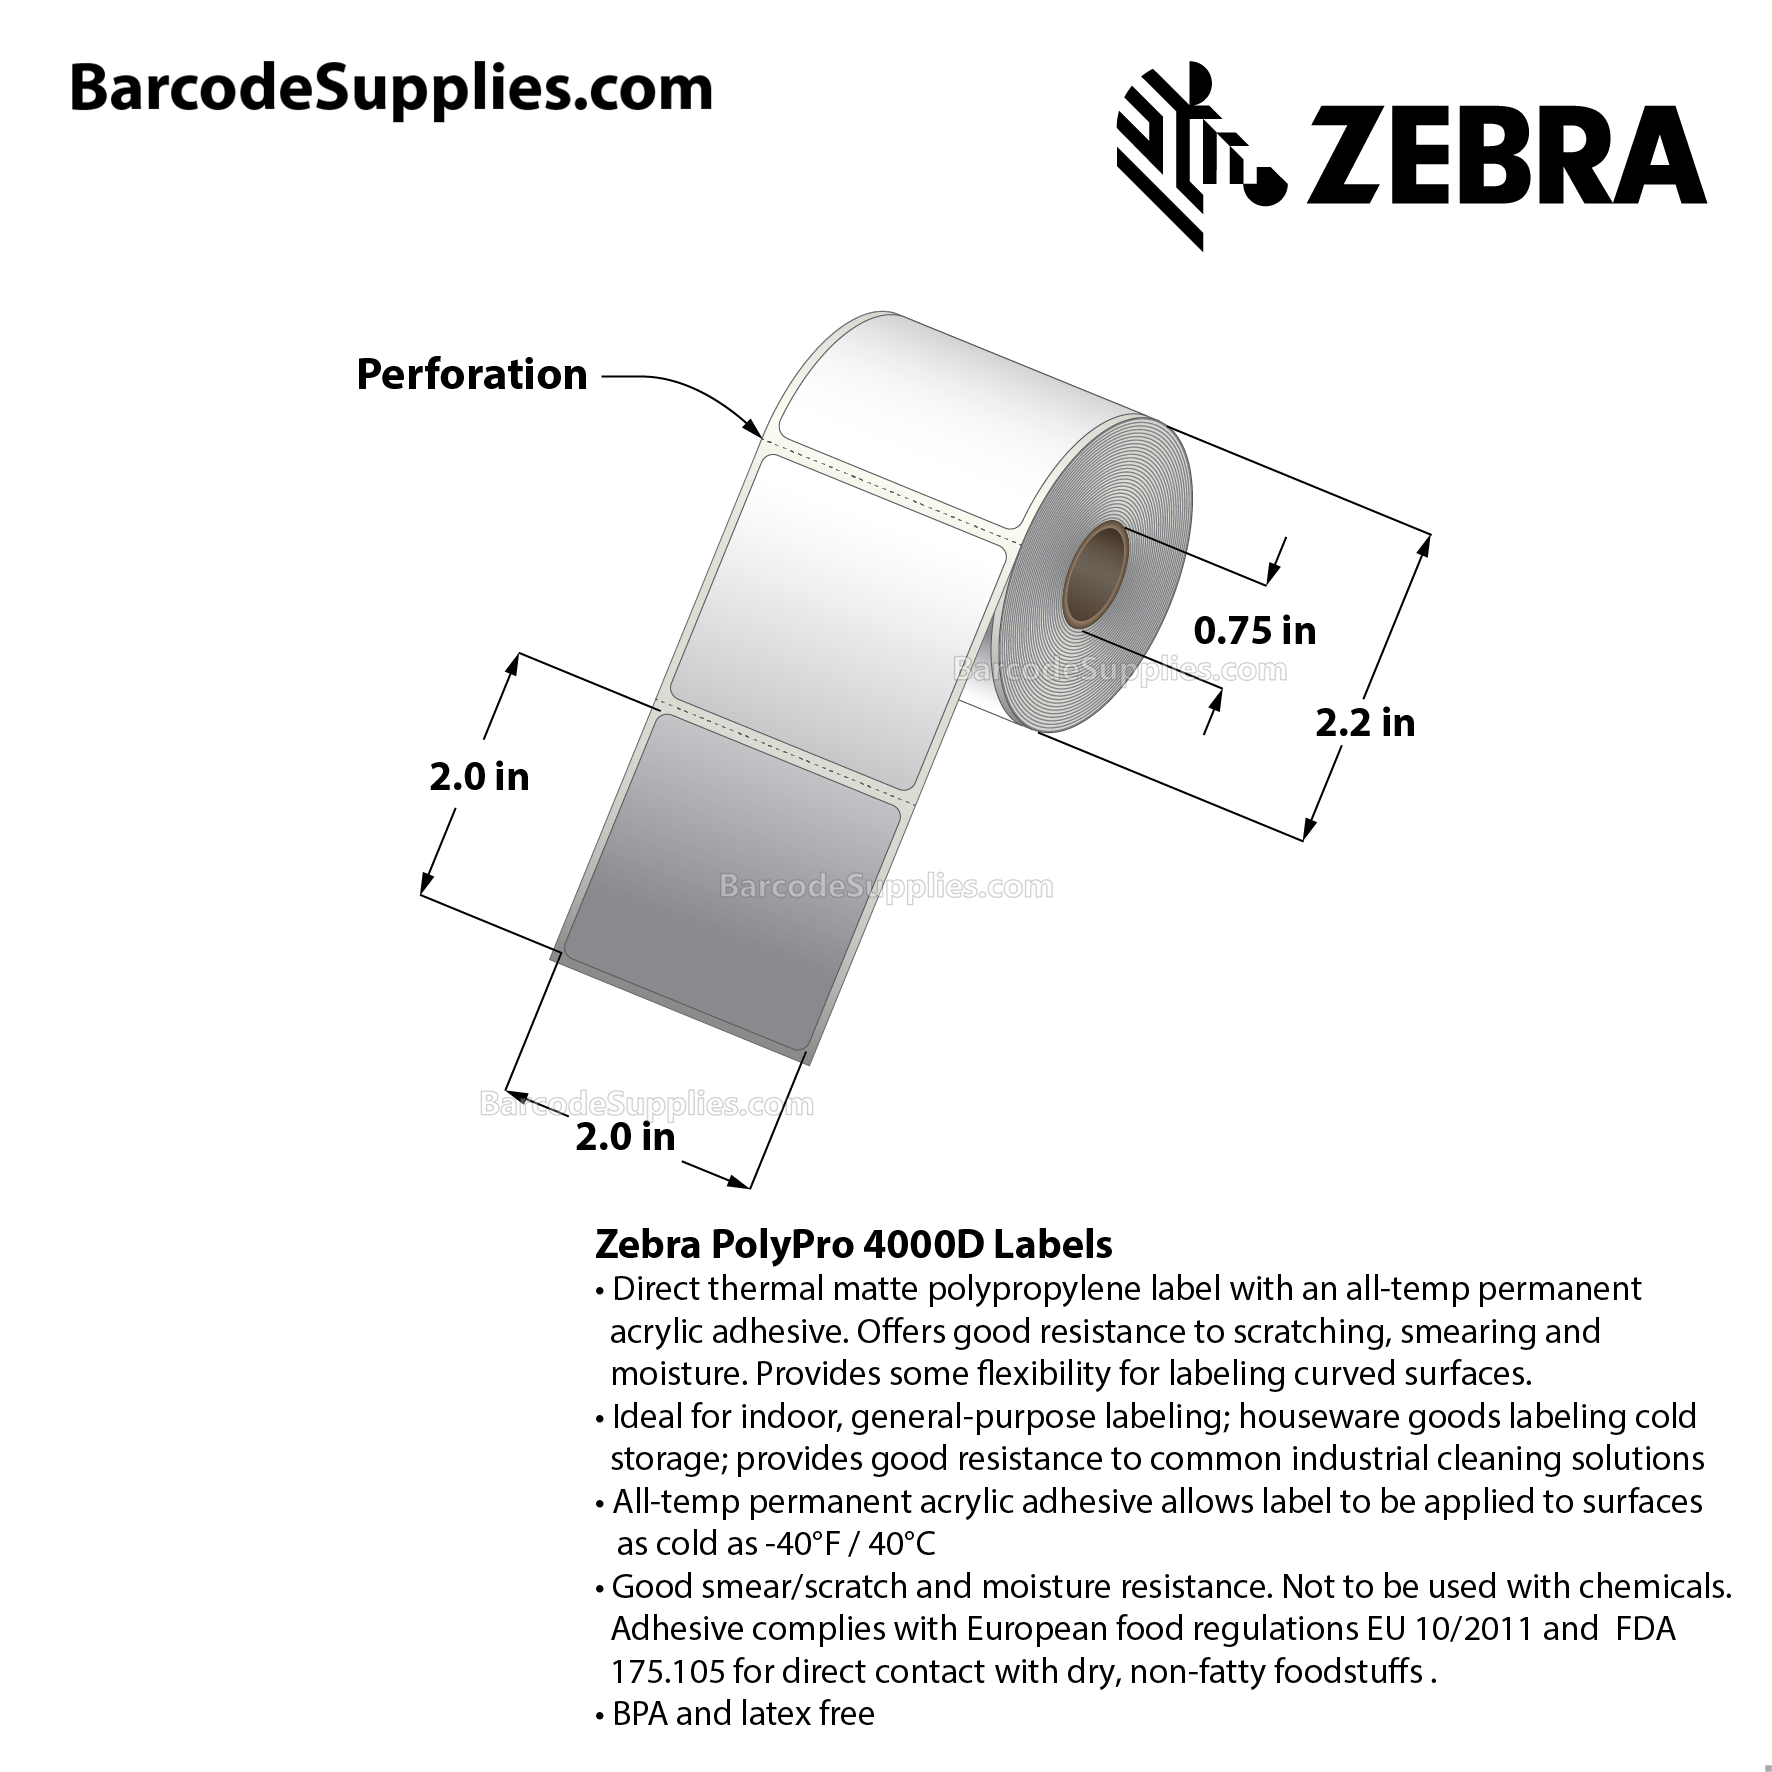 2 x 2 Direct Thermal White PolyPro 4000D Labels With All-Temp Adhesive - Perforated - 245 Labels Per Roll - Carton Of 12 Rolls - 2940 Labels Total - MPN: 10015779